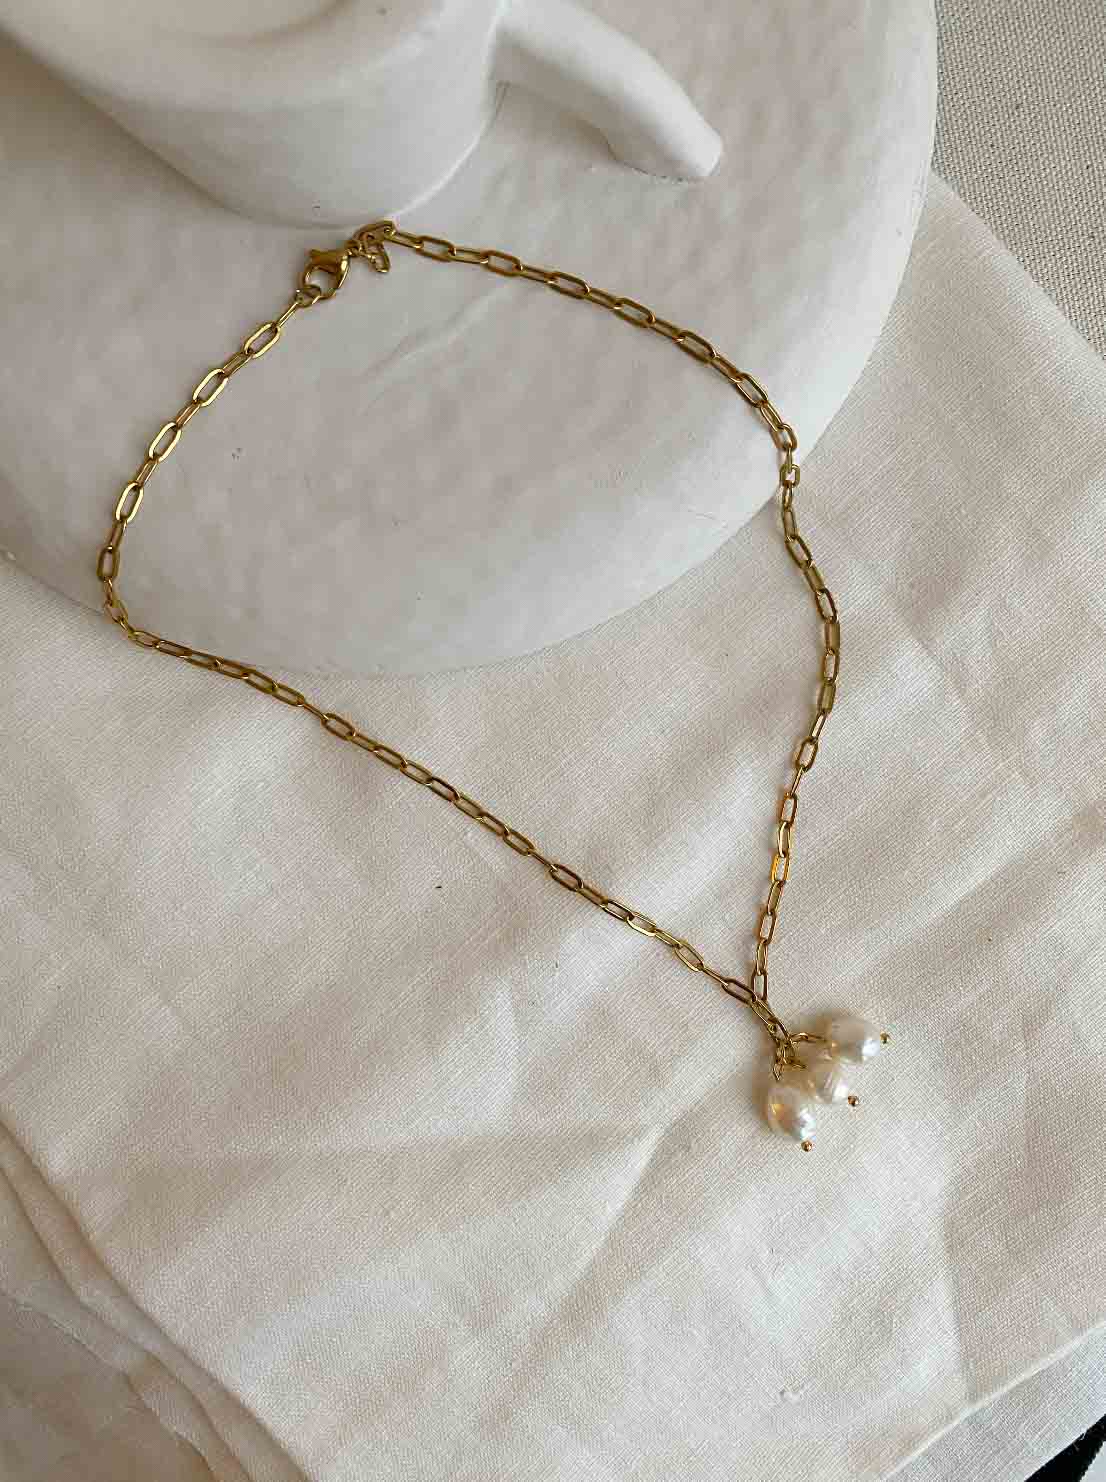 PEARL - 3 pearl pendant necklace